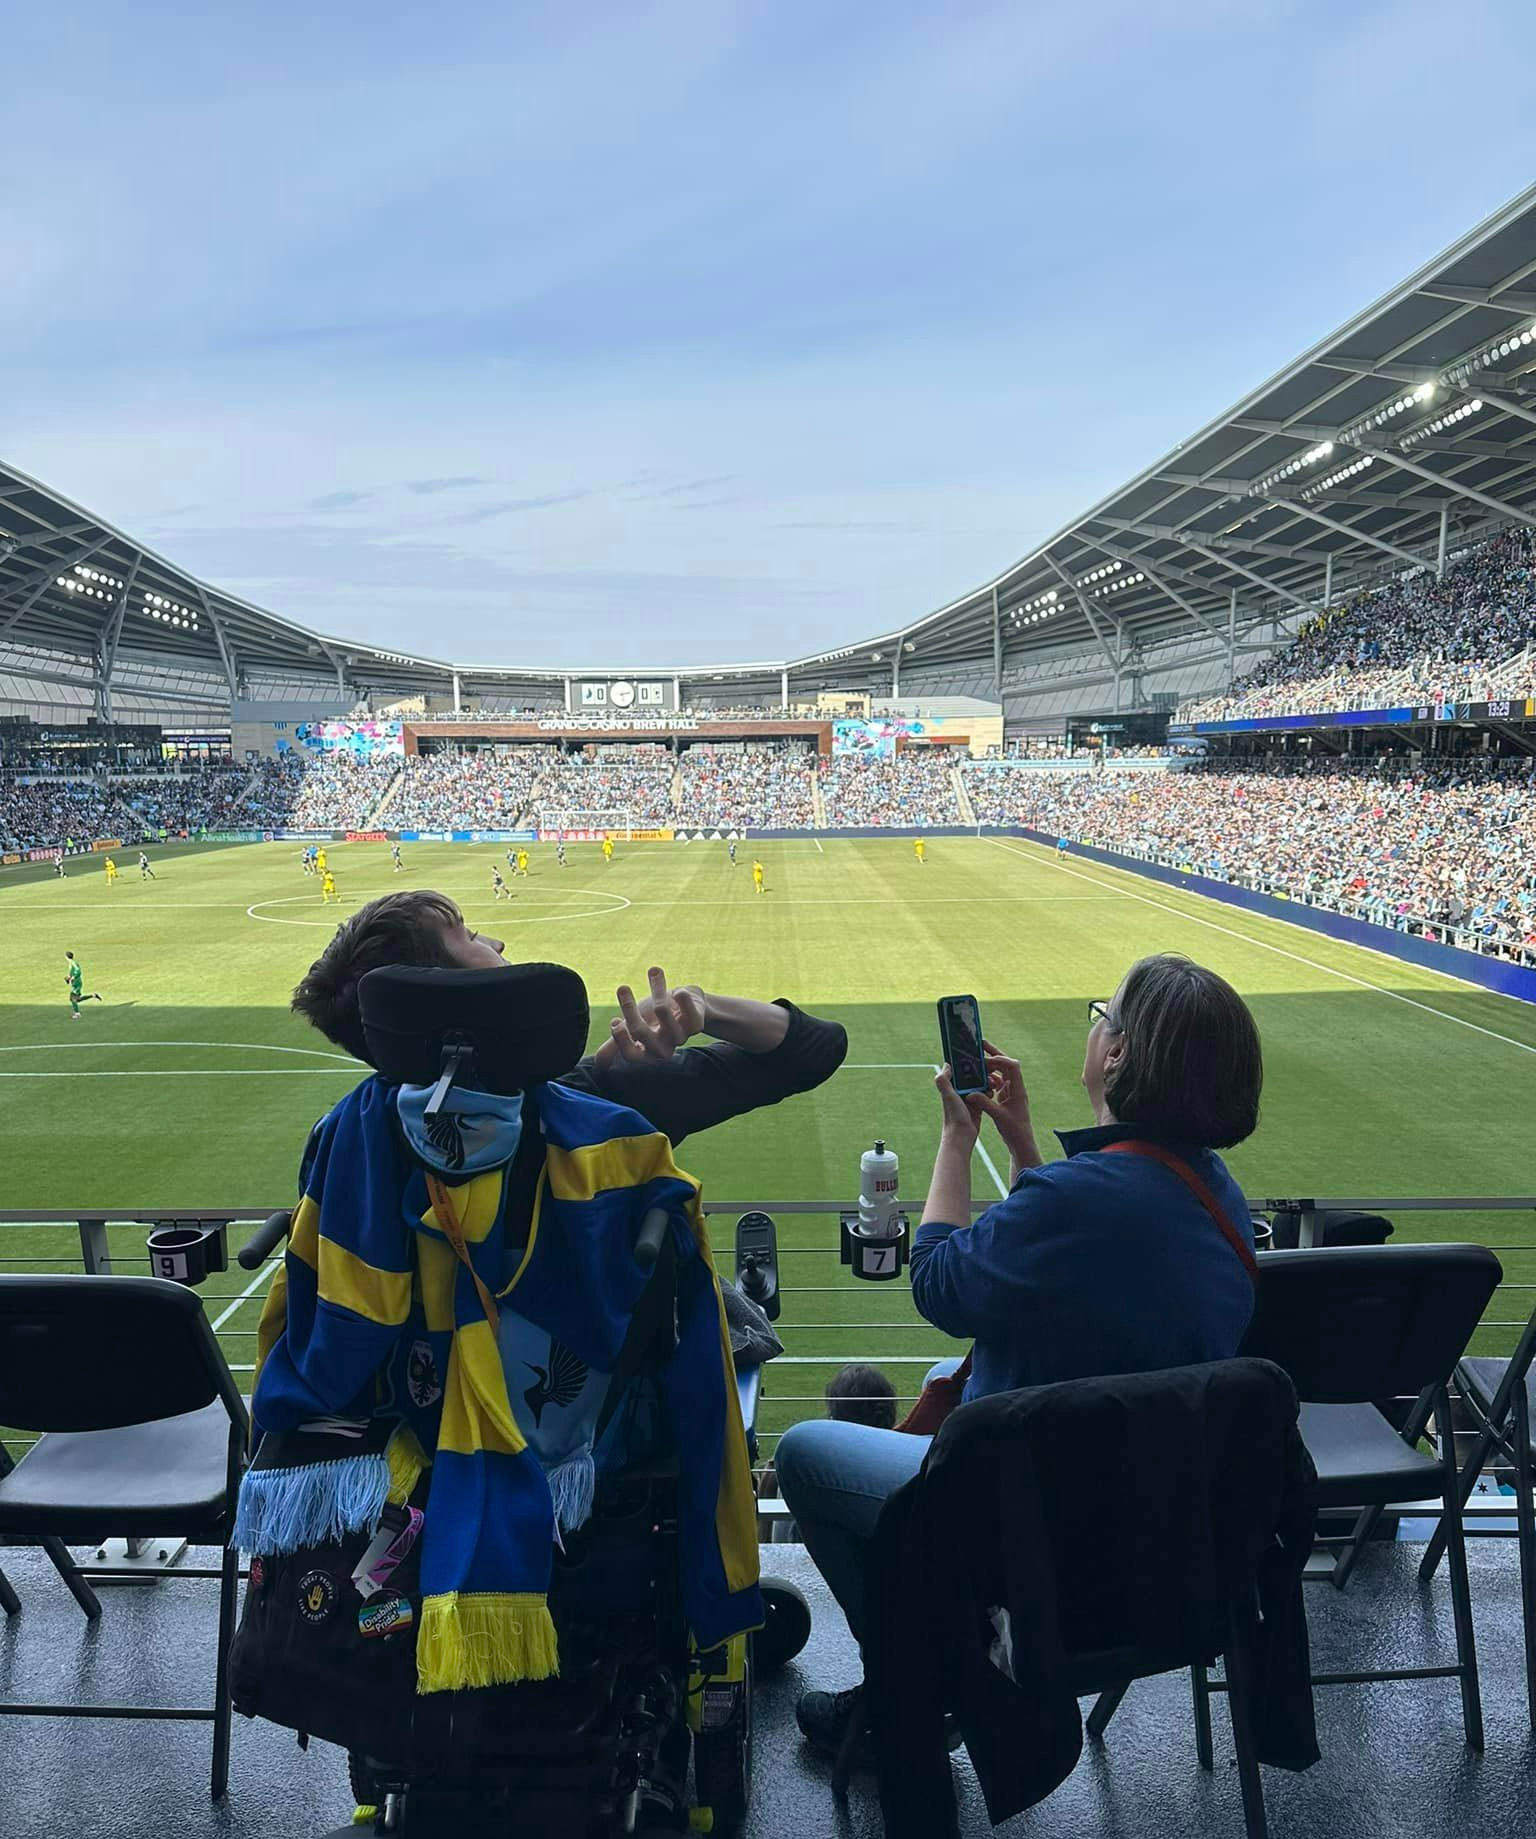 Back of Justin in his power wheelchair with soccer scarves hanging from the back, his mom sitting next to him taking a picture with cell phone overlooking MN United pitch and players